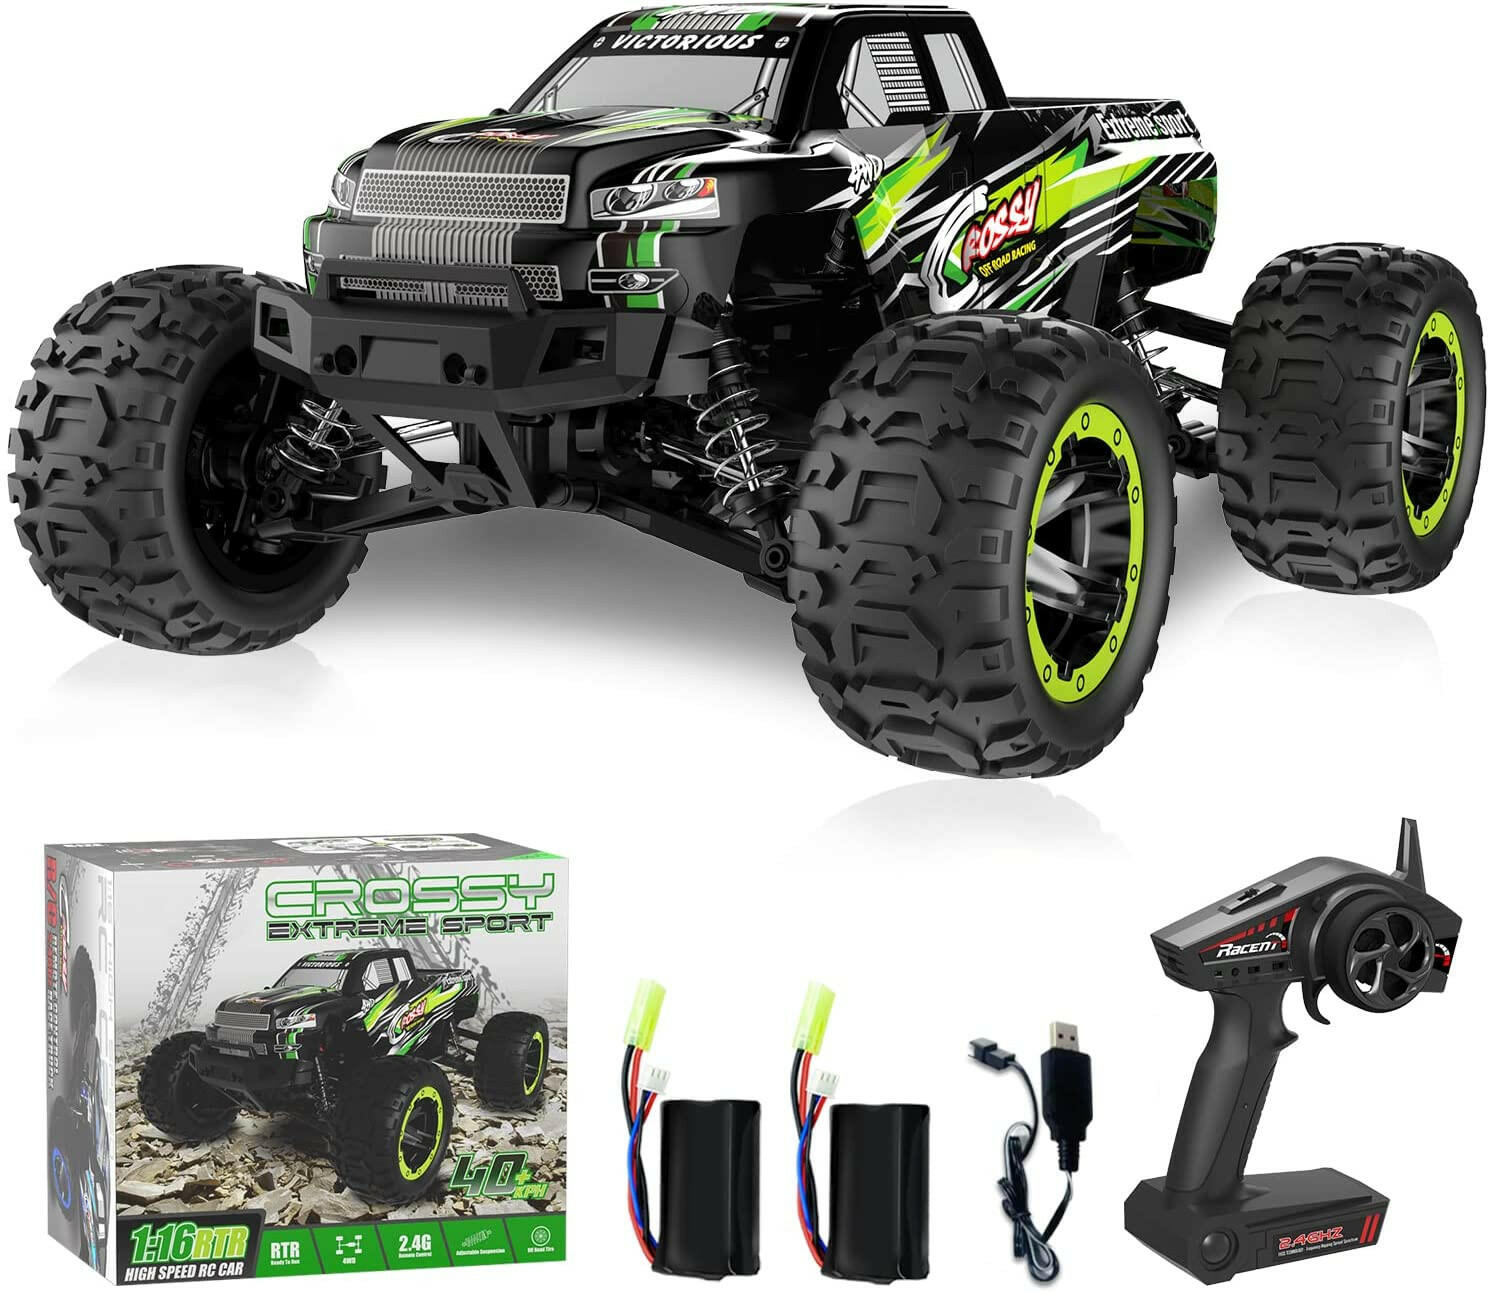 VOLANTEXRC Remote Control Car 4WD Off-Road RC Monster Truck 1:16 Scale 30MPH High Speed All Terrain RC Vehicle for Kids or Adults (785-5) (Green) - EXHOBBY